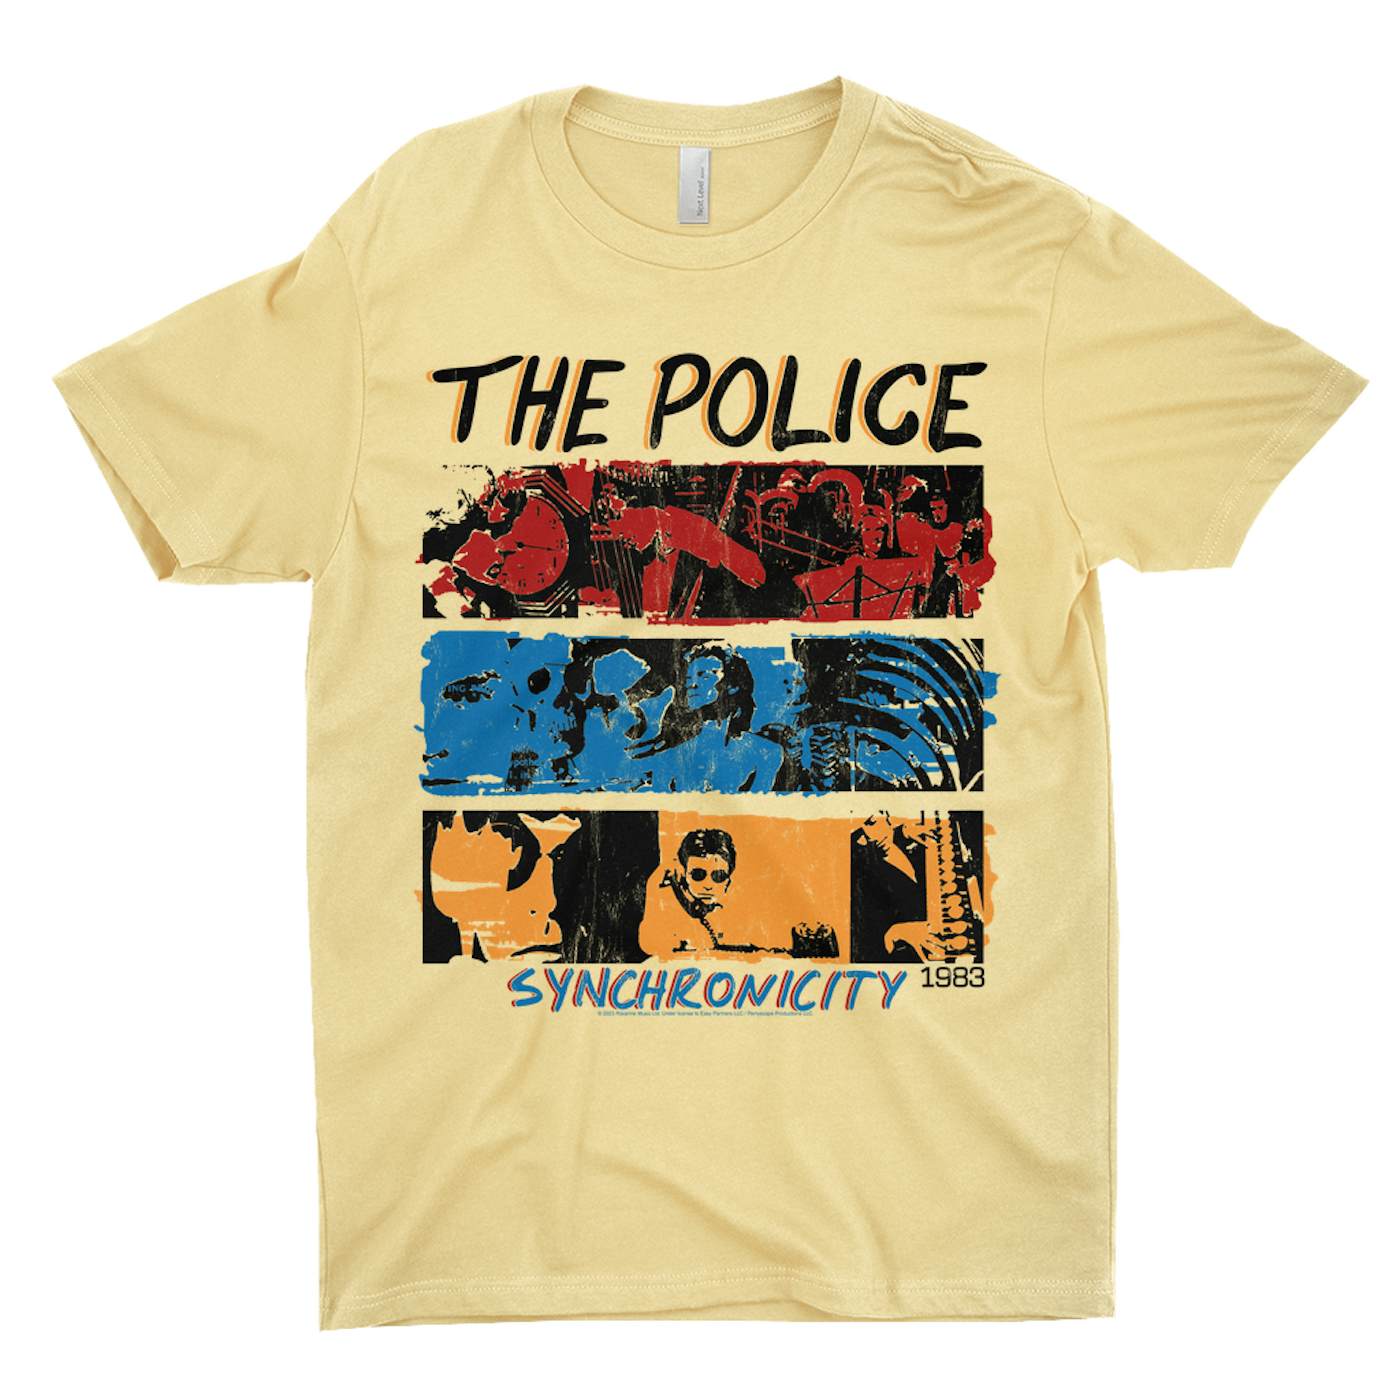 The Police T-Shirt | 1983 Synchronicity Tour Distressed (Merchbar Exclusive) The Police Shirt